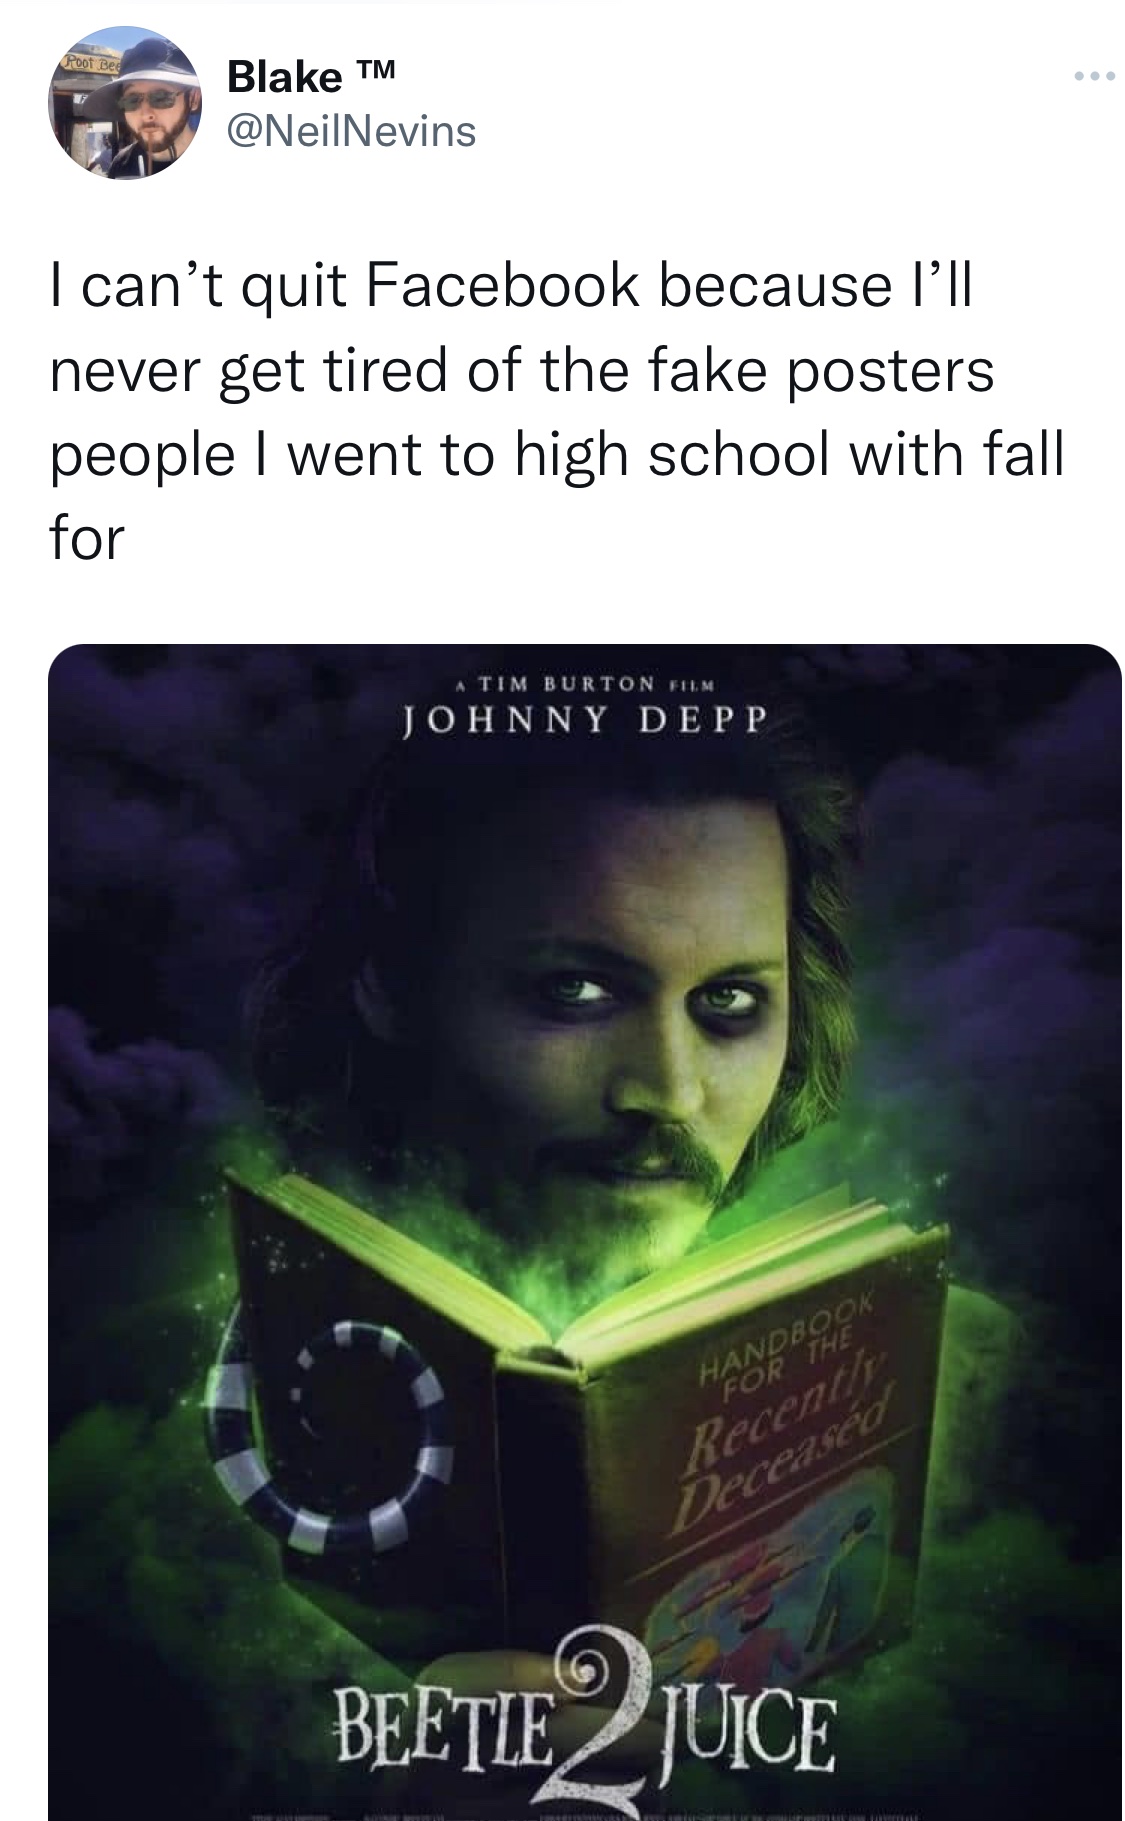 Tweets roasting celebs - beetlejuice 2 johnny depp - Poot Bee Blake M I can't quit Facebook because I'll never get tired of the fake posters people I went to high school with fall for Thur Allt Fr A Tim Burton Film Johnny Depp Handbook For The Recently De